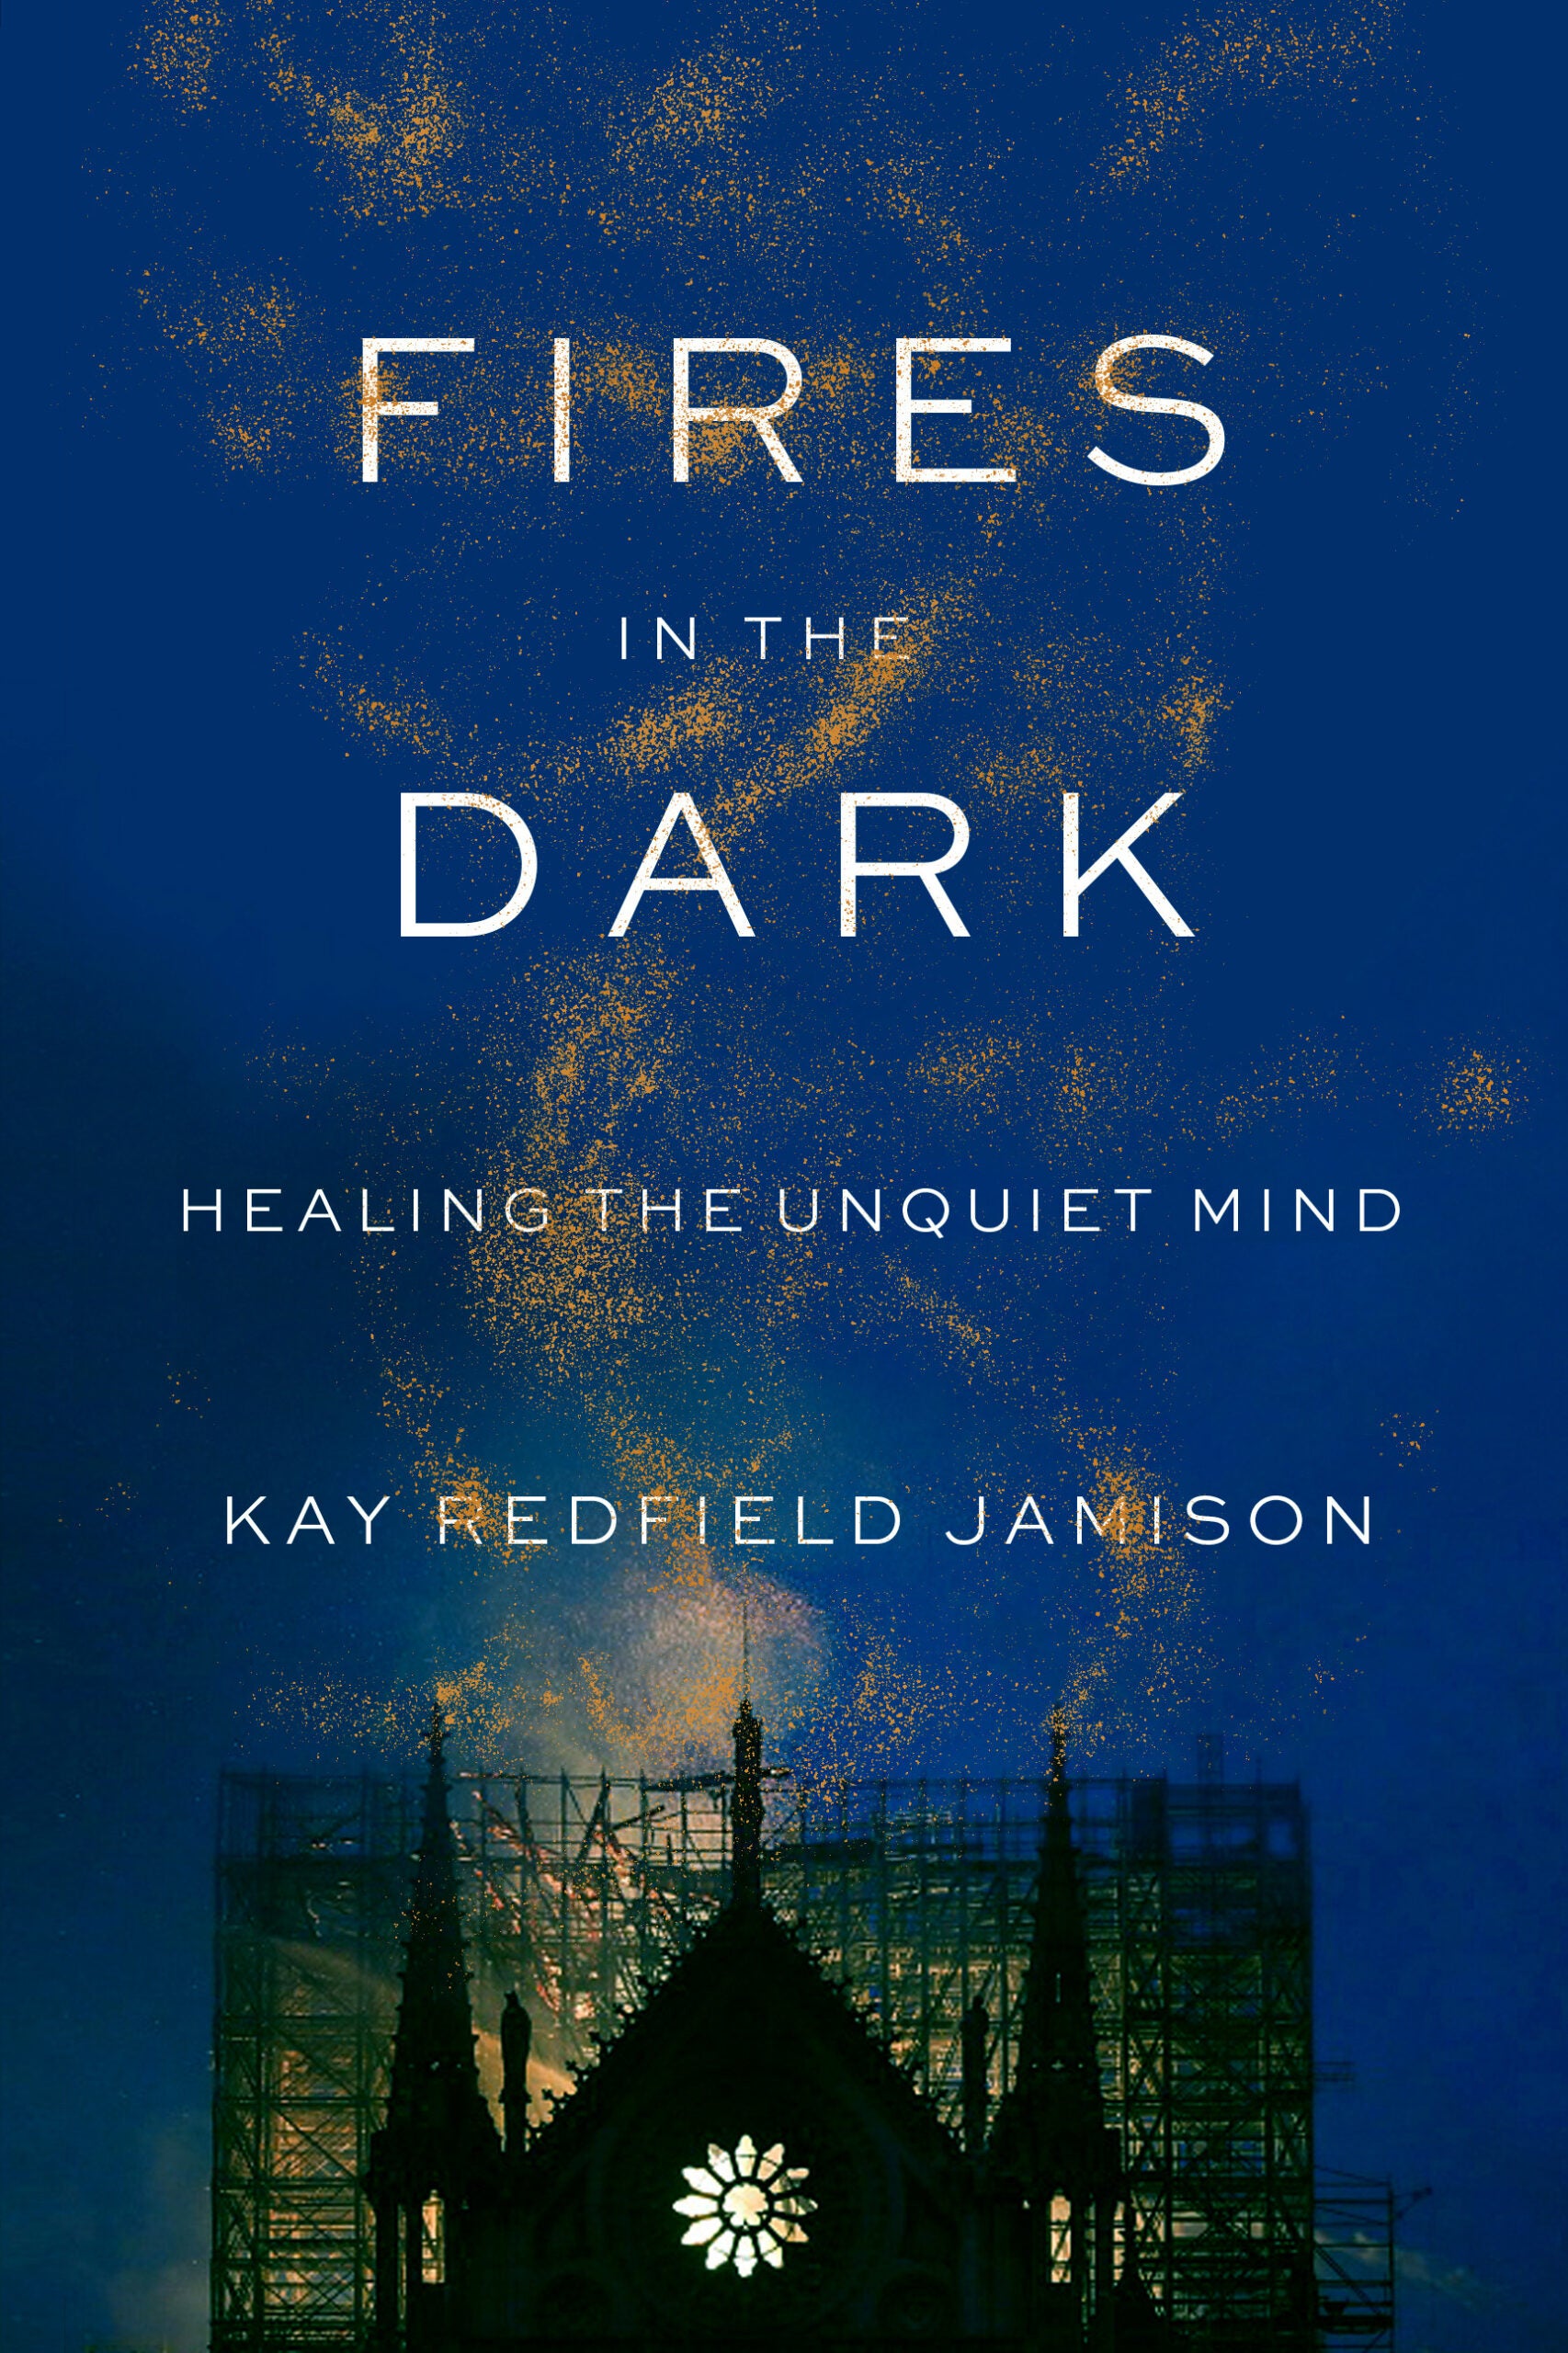 “Fires in the Dark” by Kay Redfield Jamison